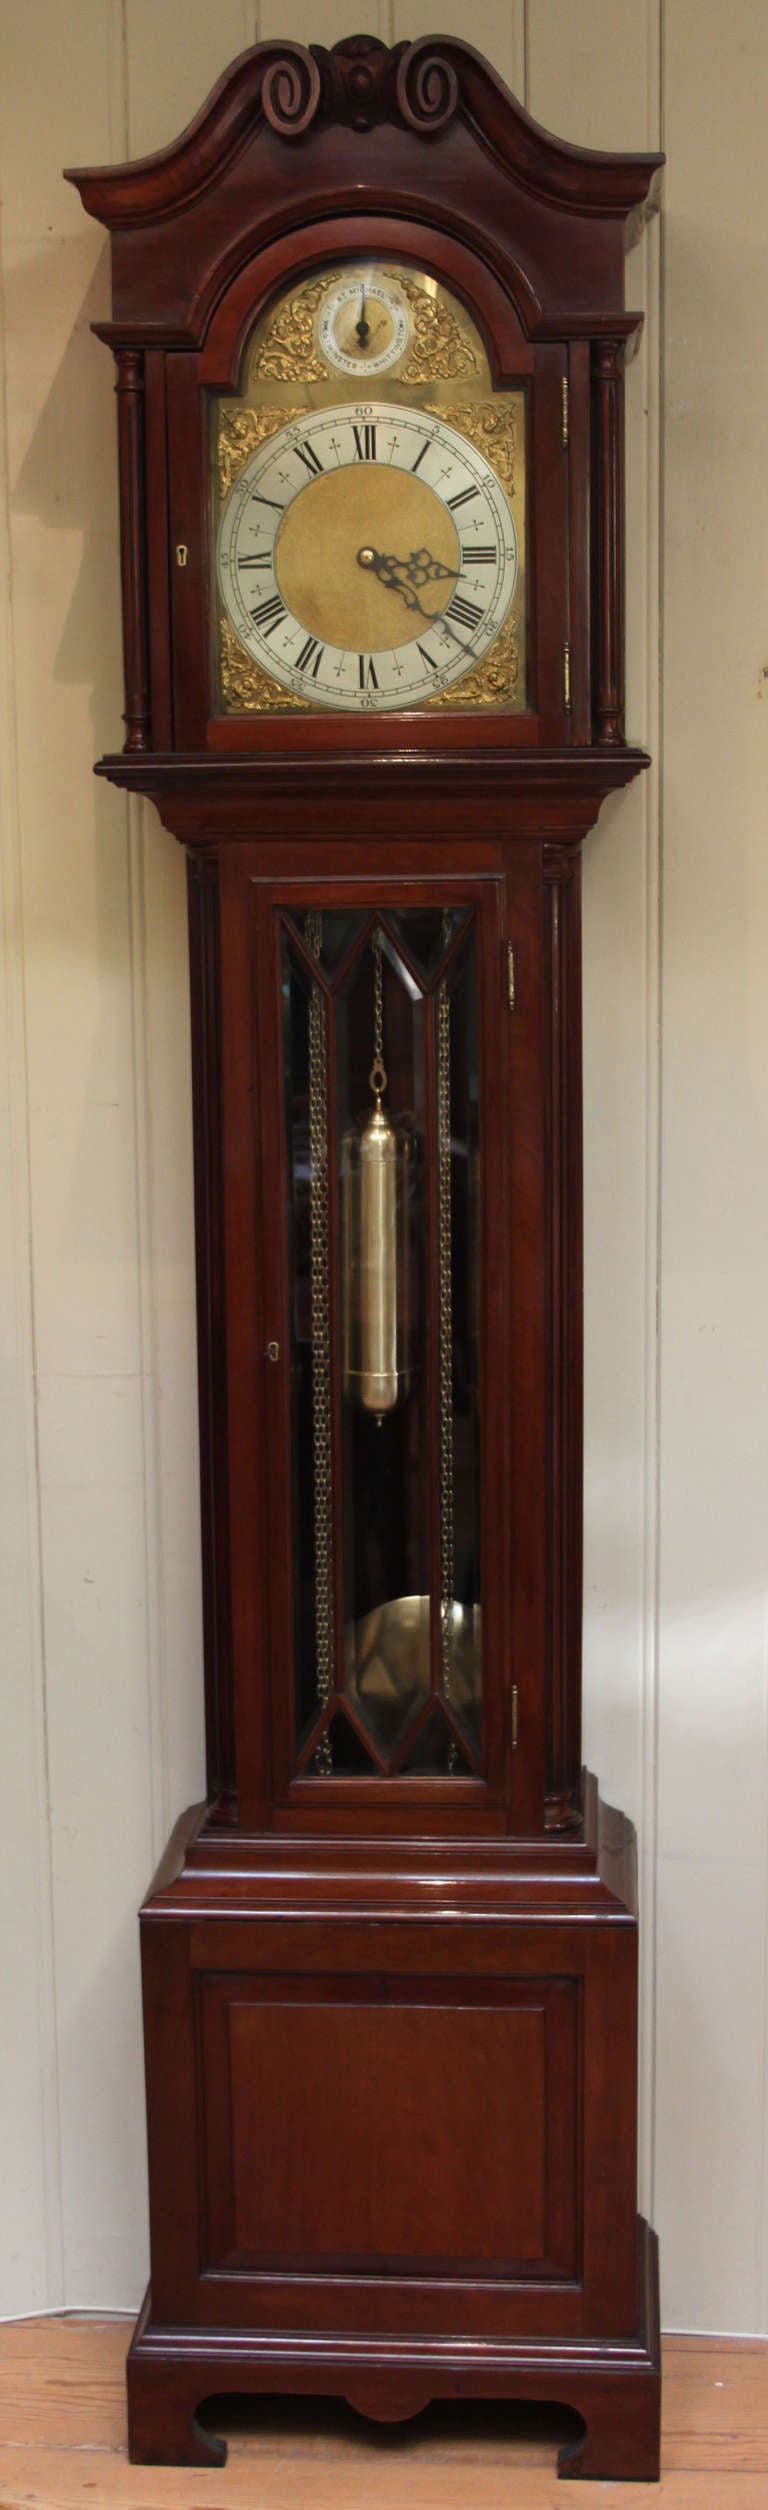 A good quality Edwardian solid mahogany musical longcase clock. The case is in an 18th Century style, having a carved swan neck pediment with a central cartouche, reeded side columns, and a break arch hood with side windows. The long door has glazed